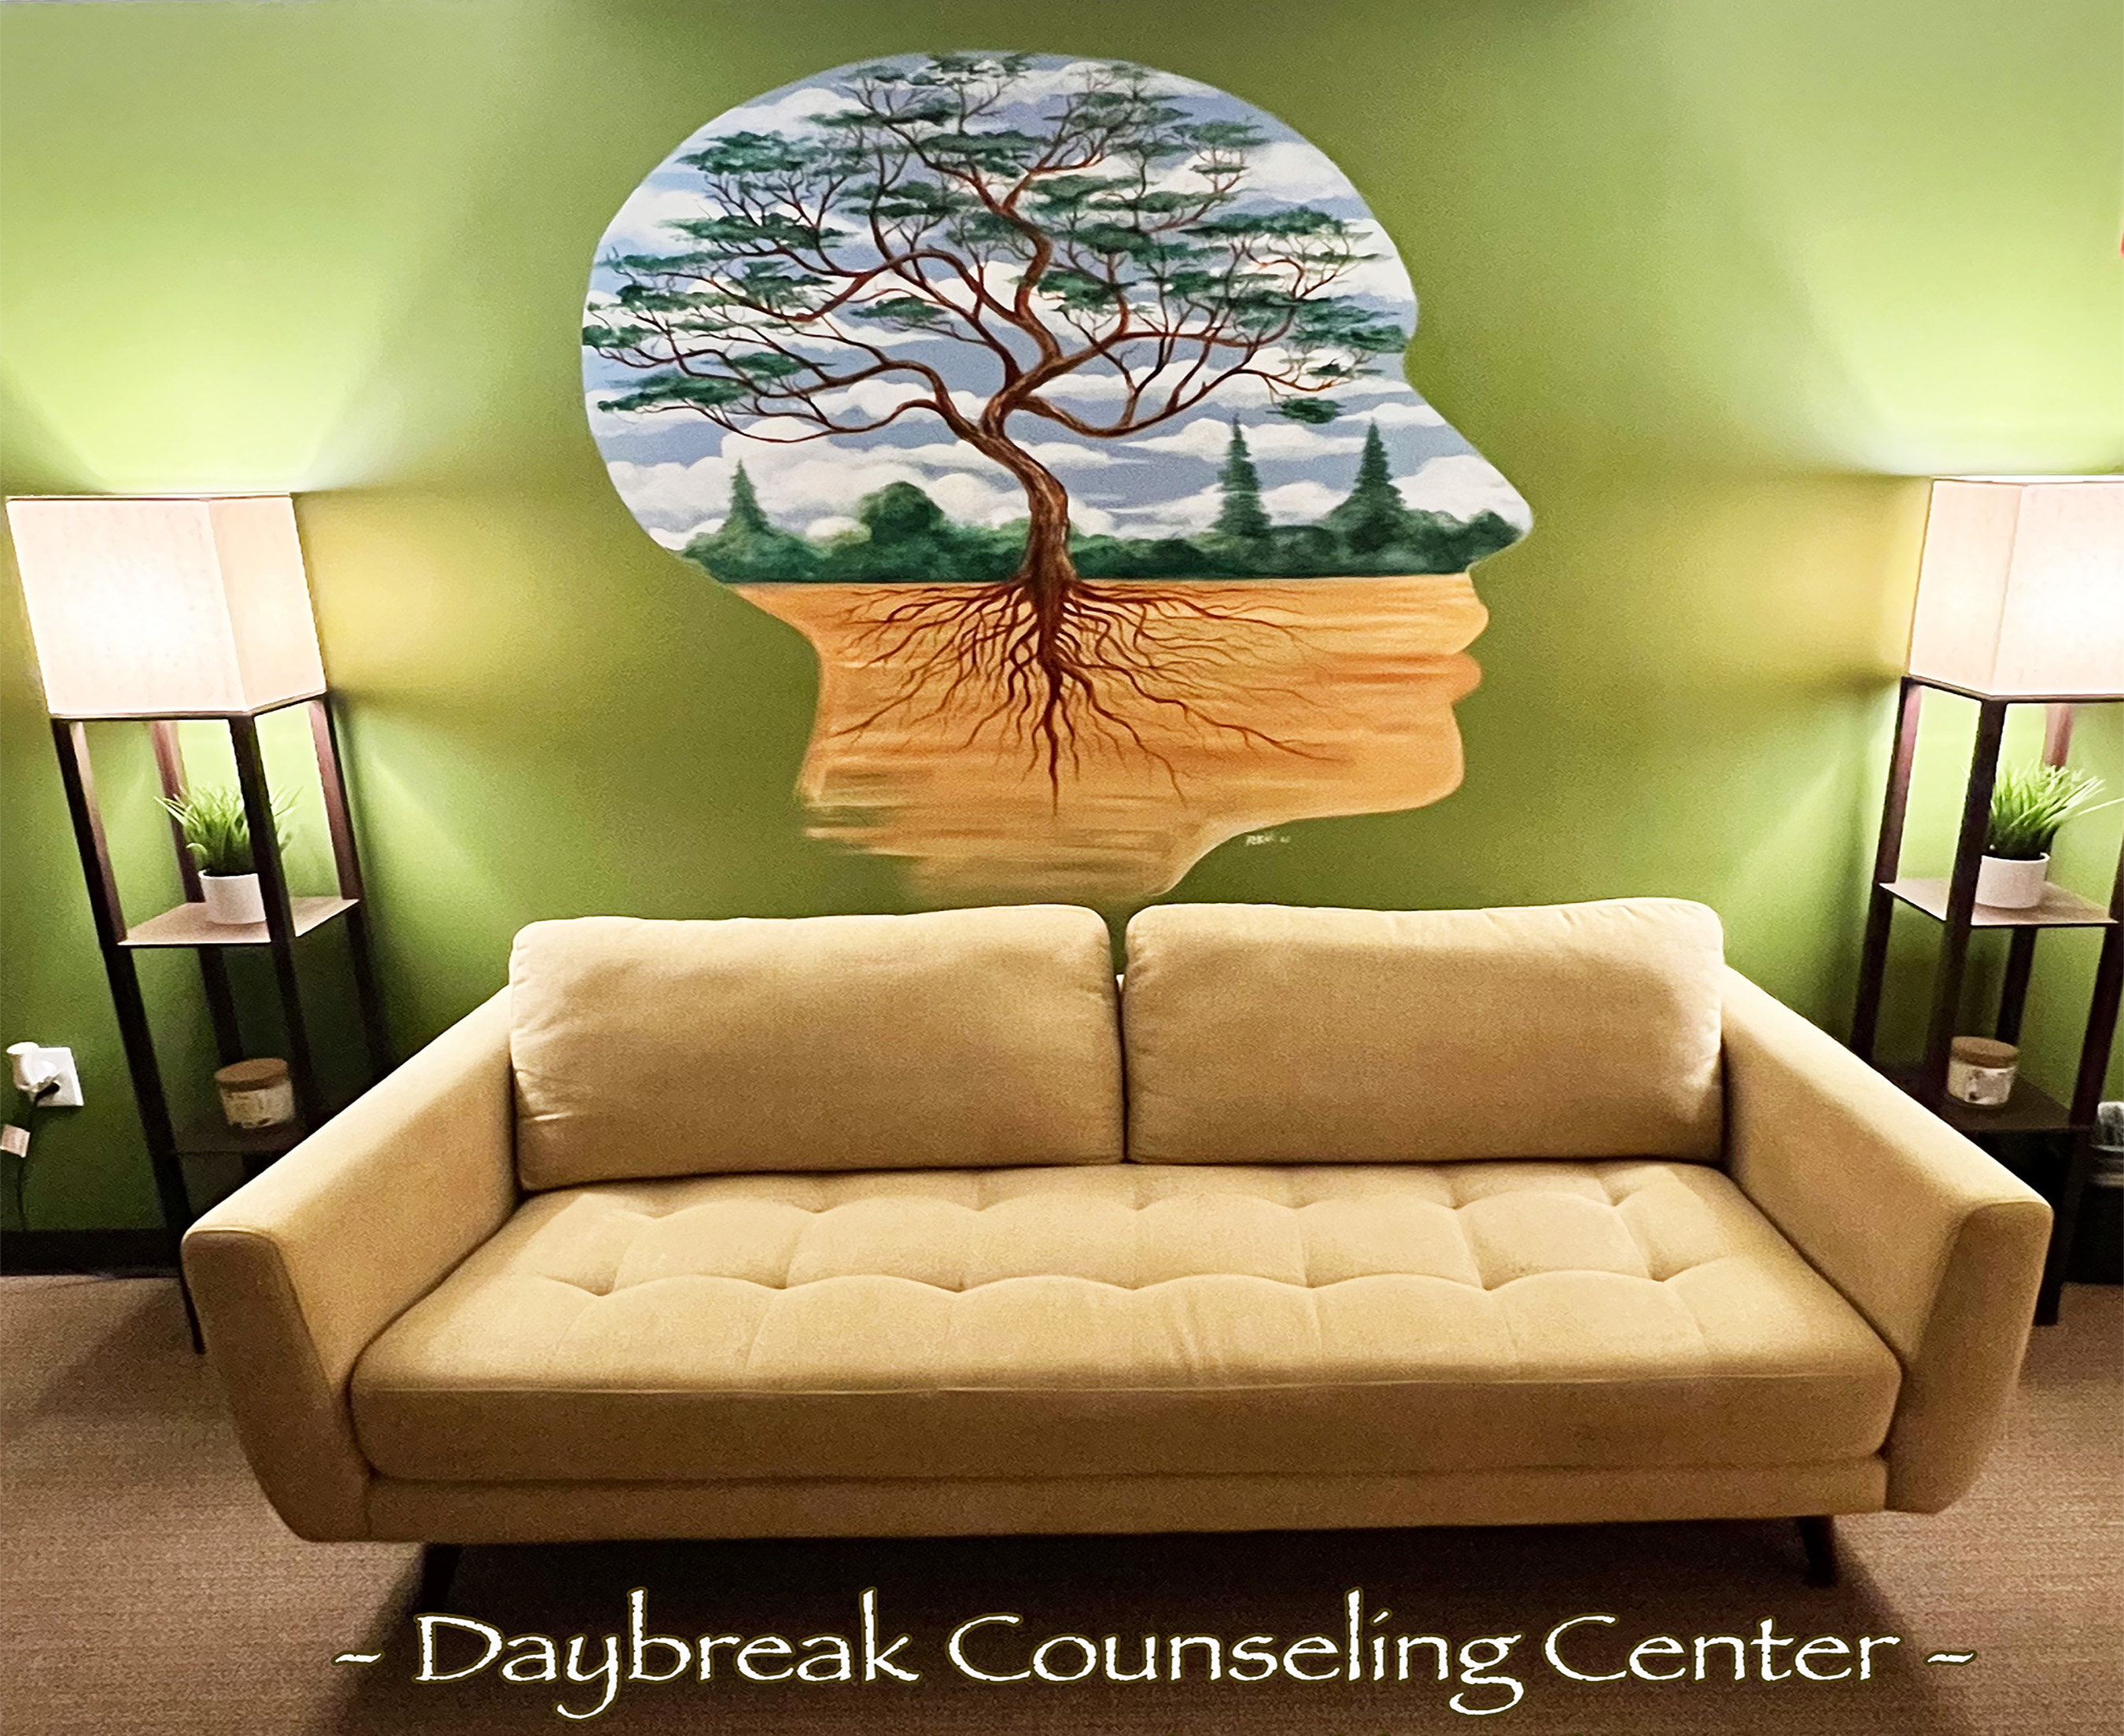 Long beach psychotherapy